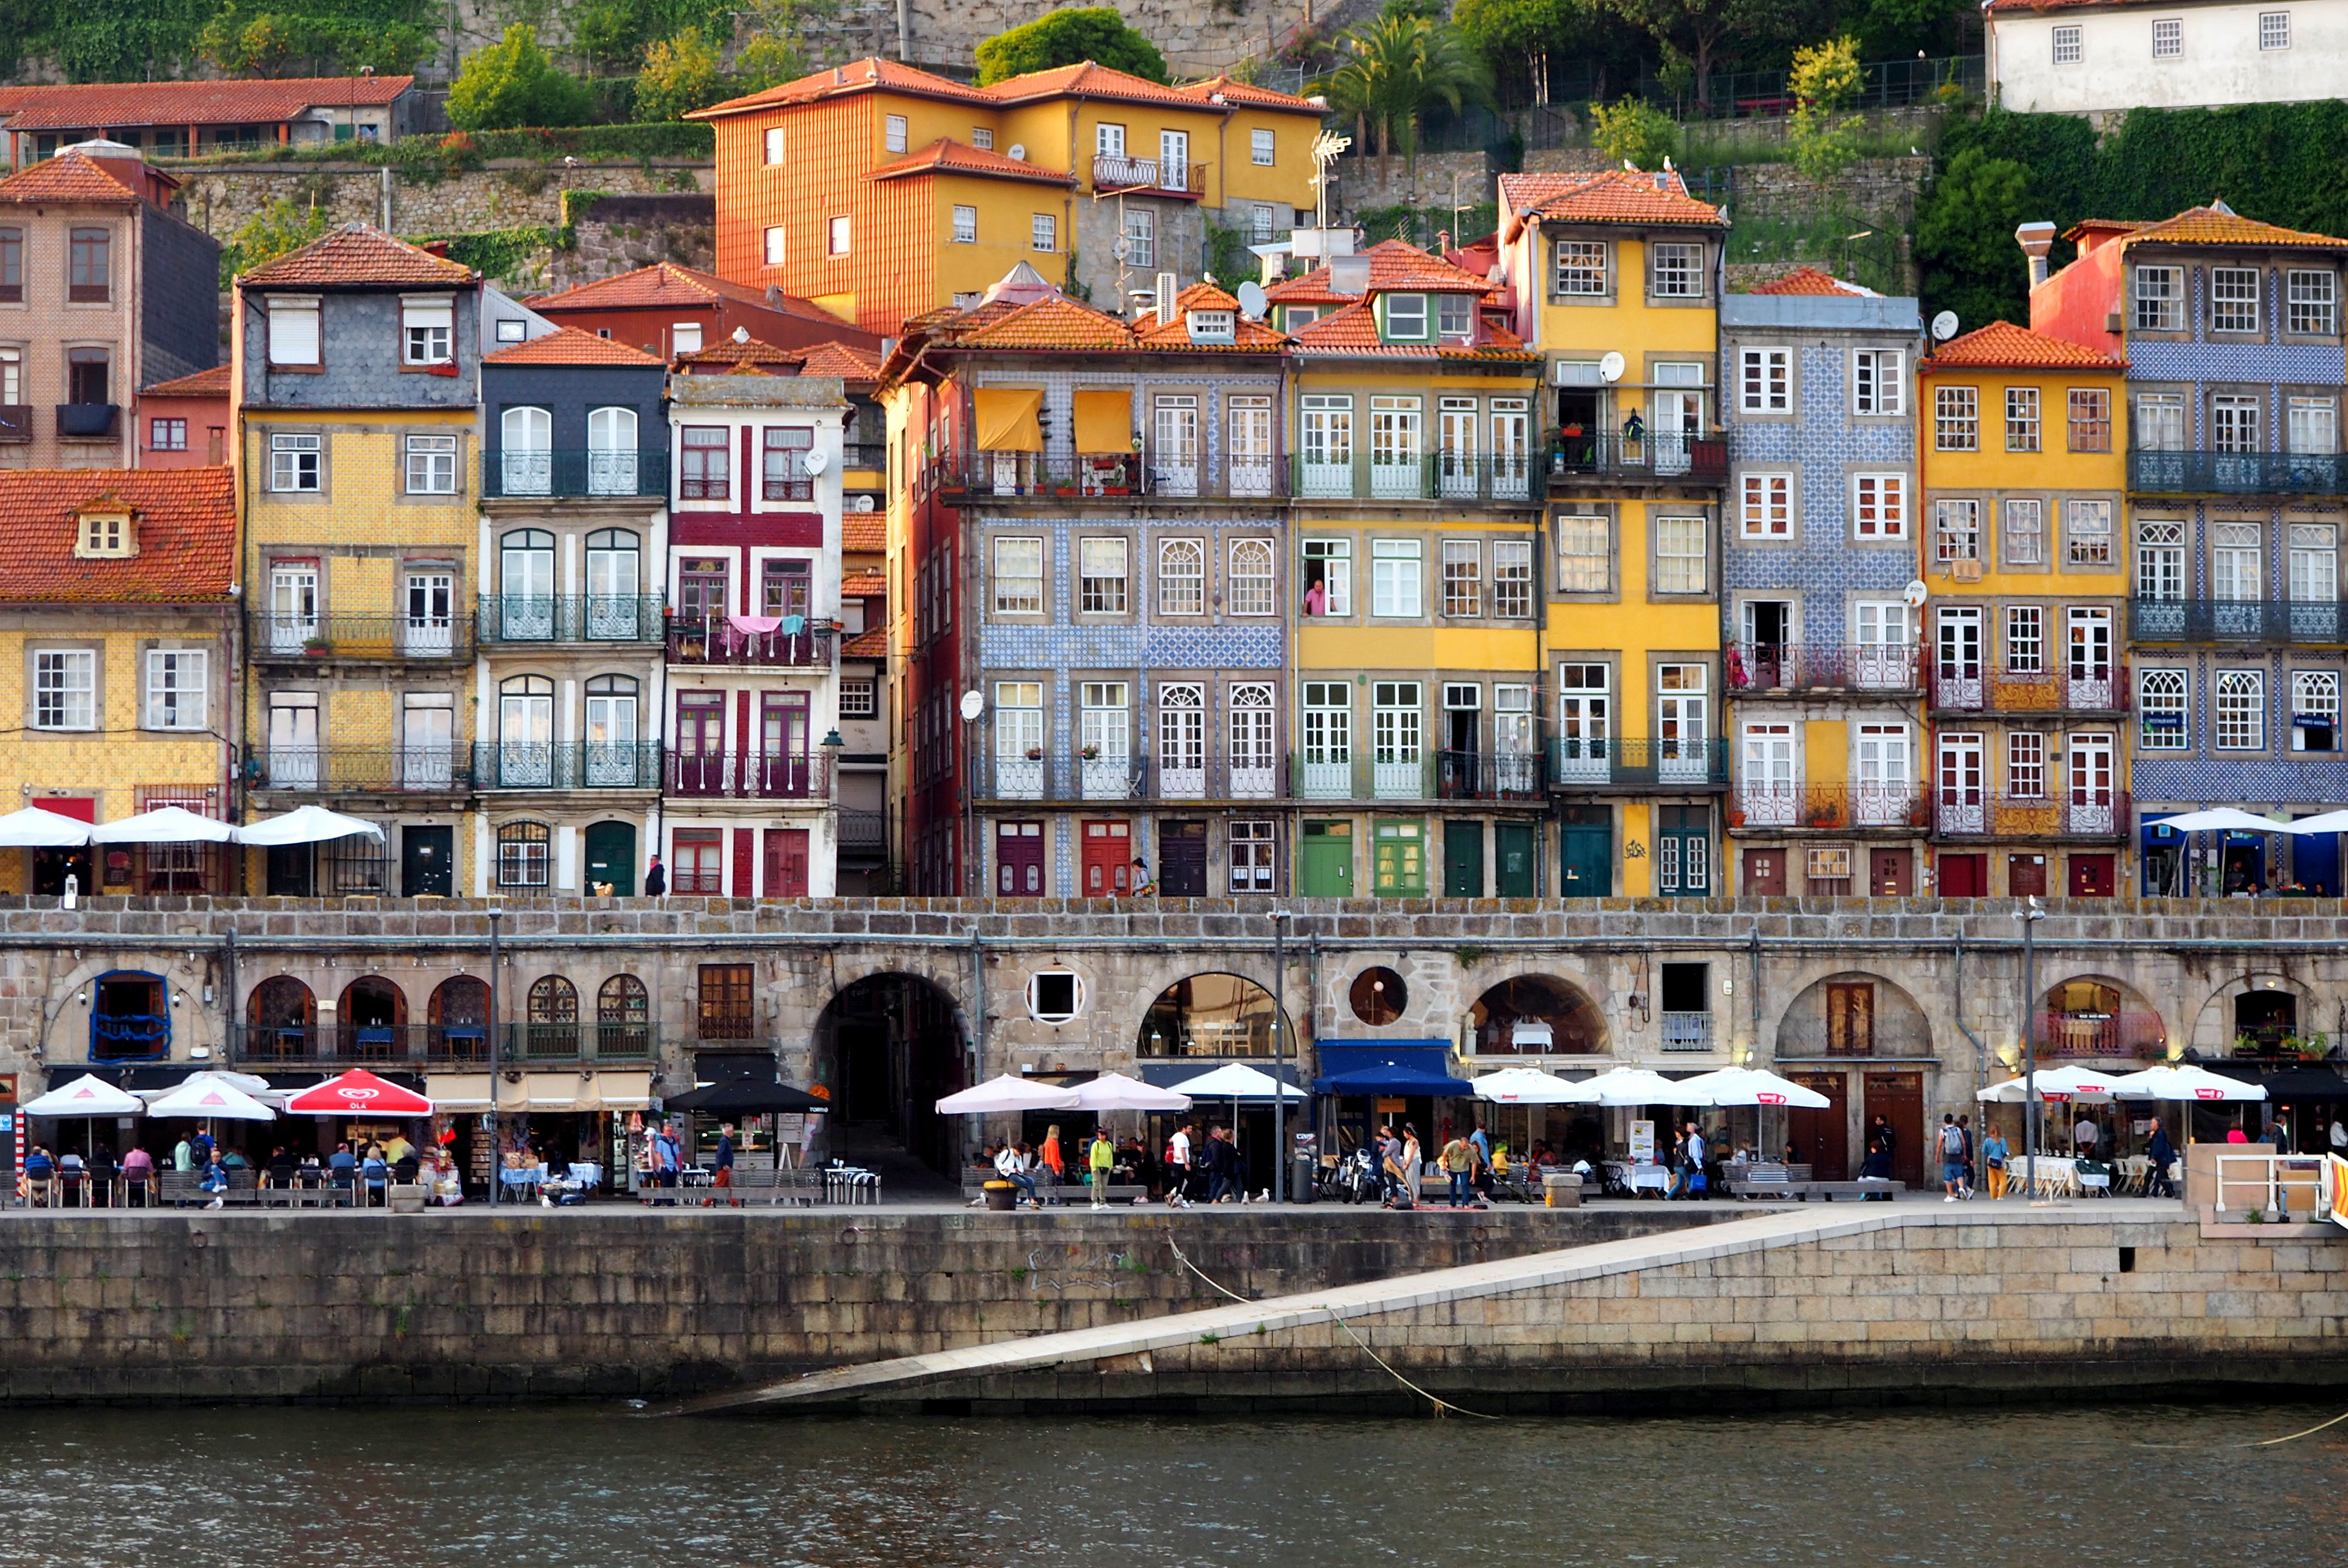 30 Photos of Porto Portugal that we can't stop looking at